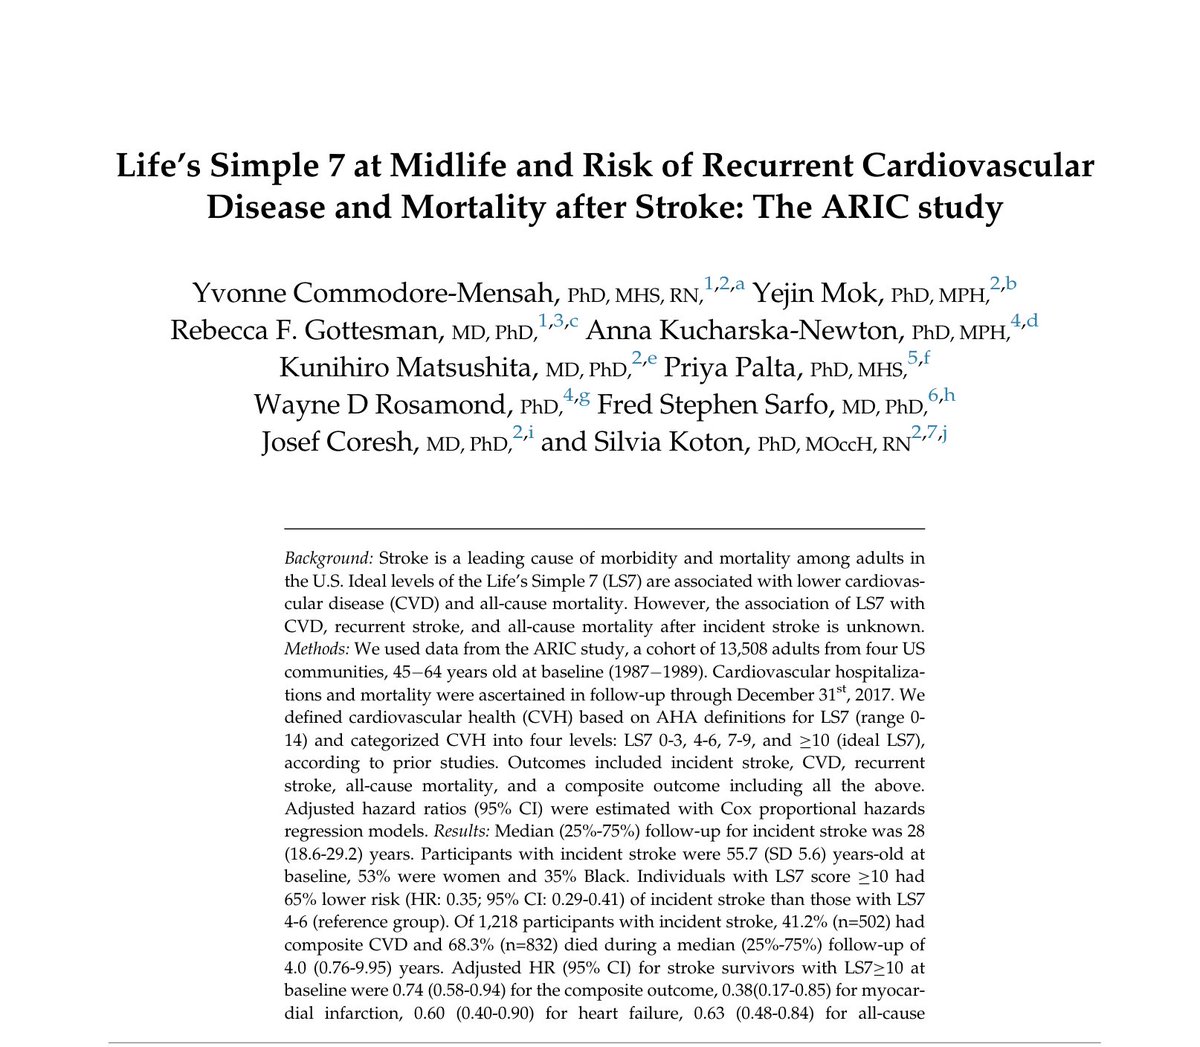 Our new publication in @JSCVD2.Key message: Good cardiovascular health(@AHAScience Life's Simple 7) in midlife is associated with lower risks of incident #stroke and recurrent #cardiovasculardisease after stroke. authors.elsevier.com/a/1eyaS3lH44mK… @JohnsHopkinsEPI @JHUNursing